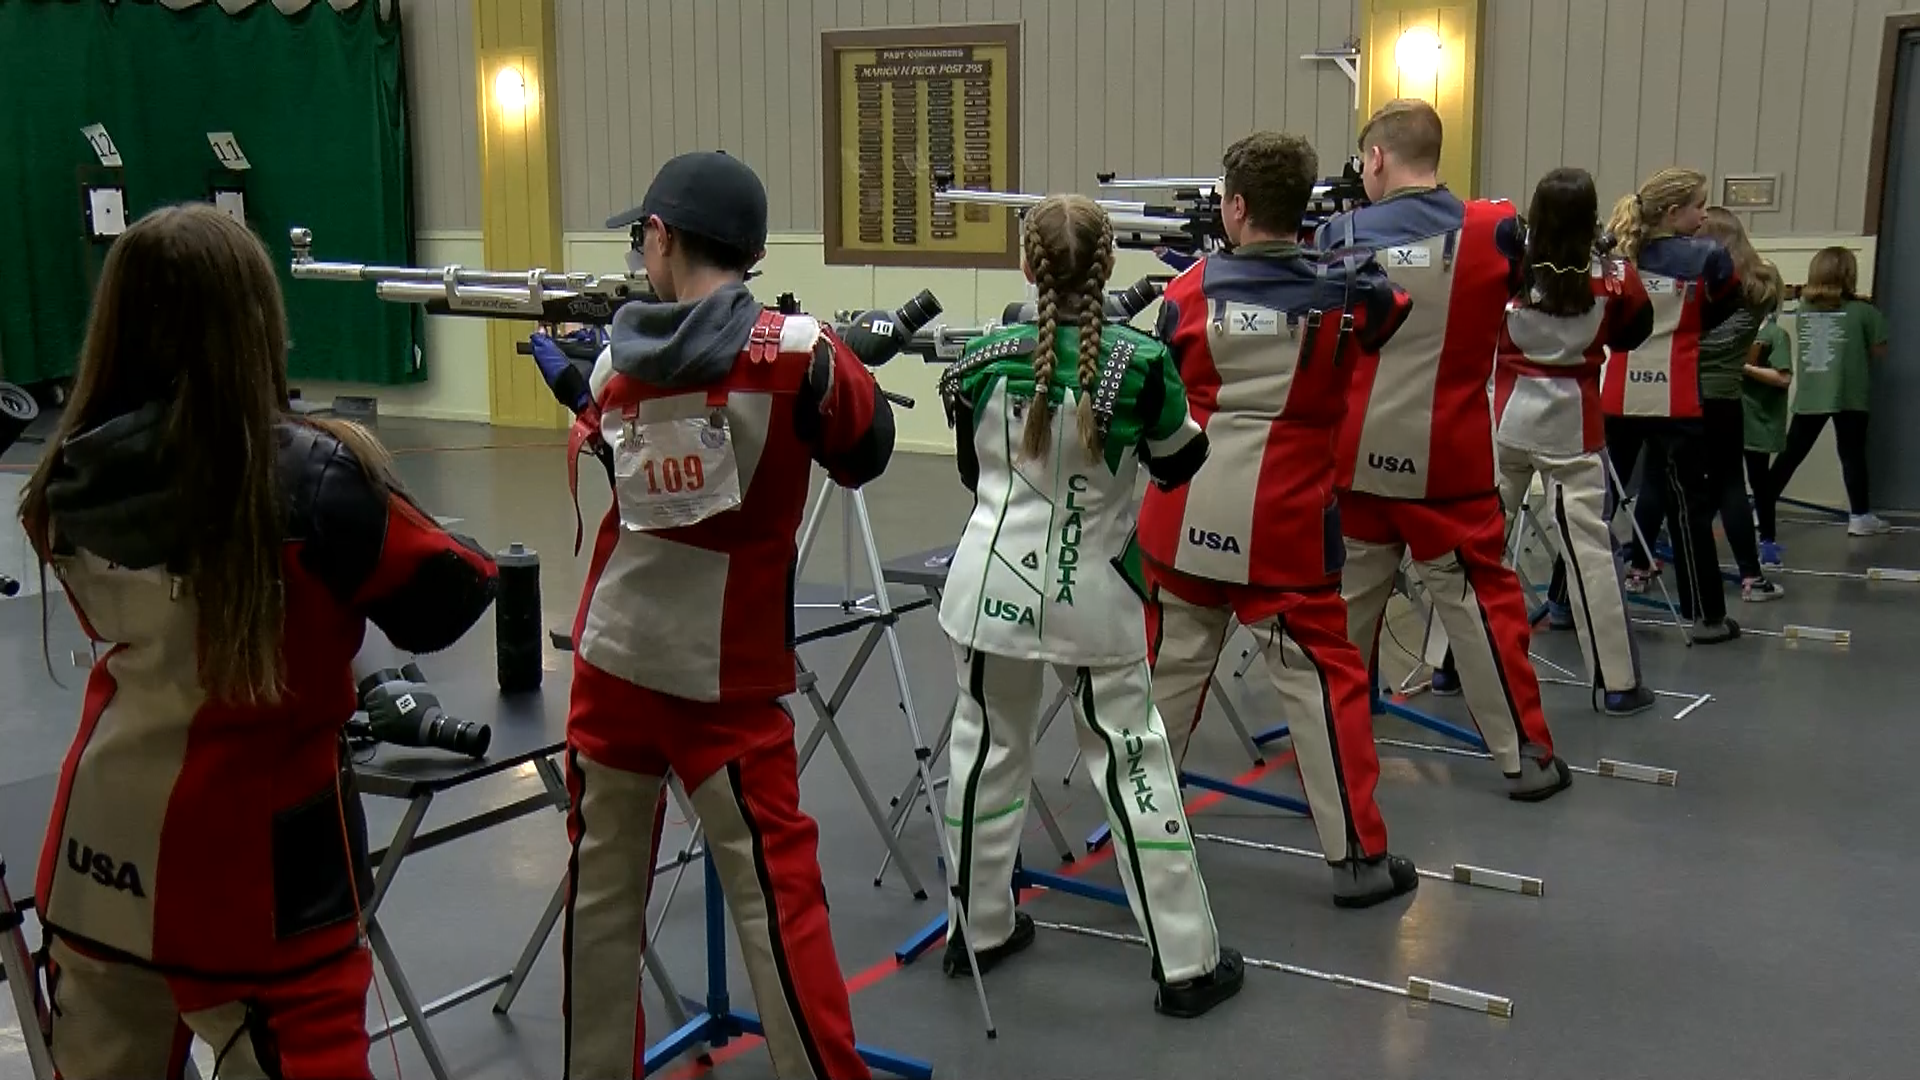 The Green Springs American Legion is home to this youth marksmanship team.